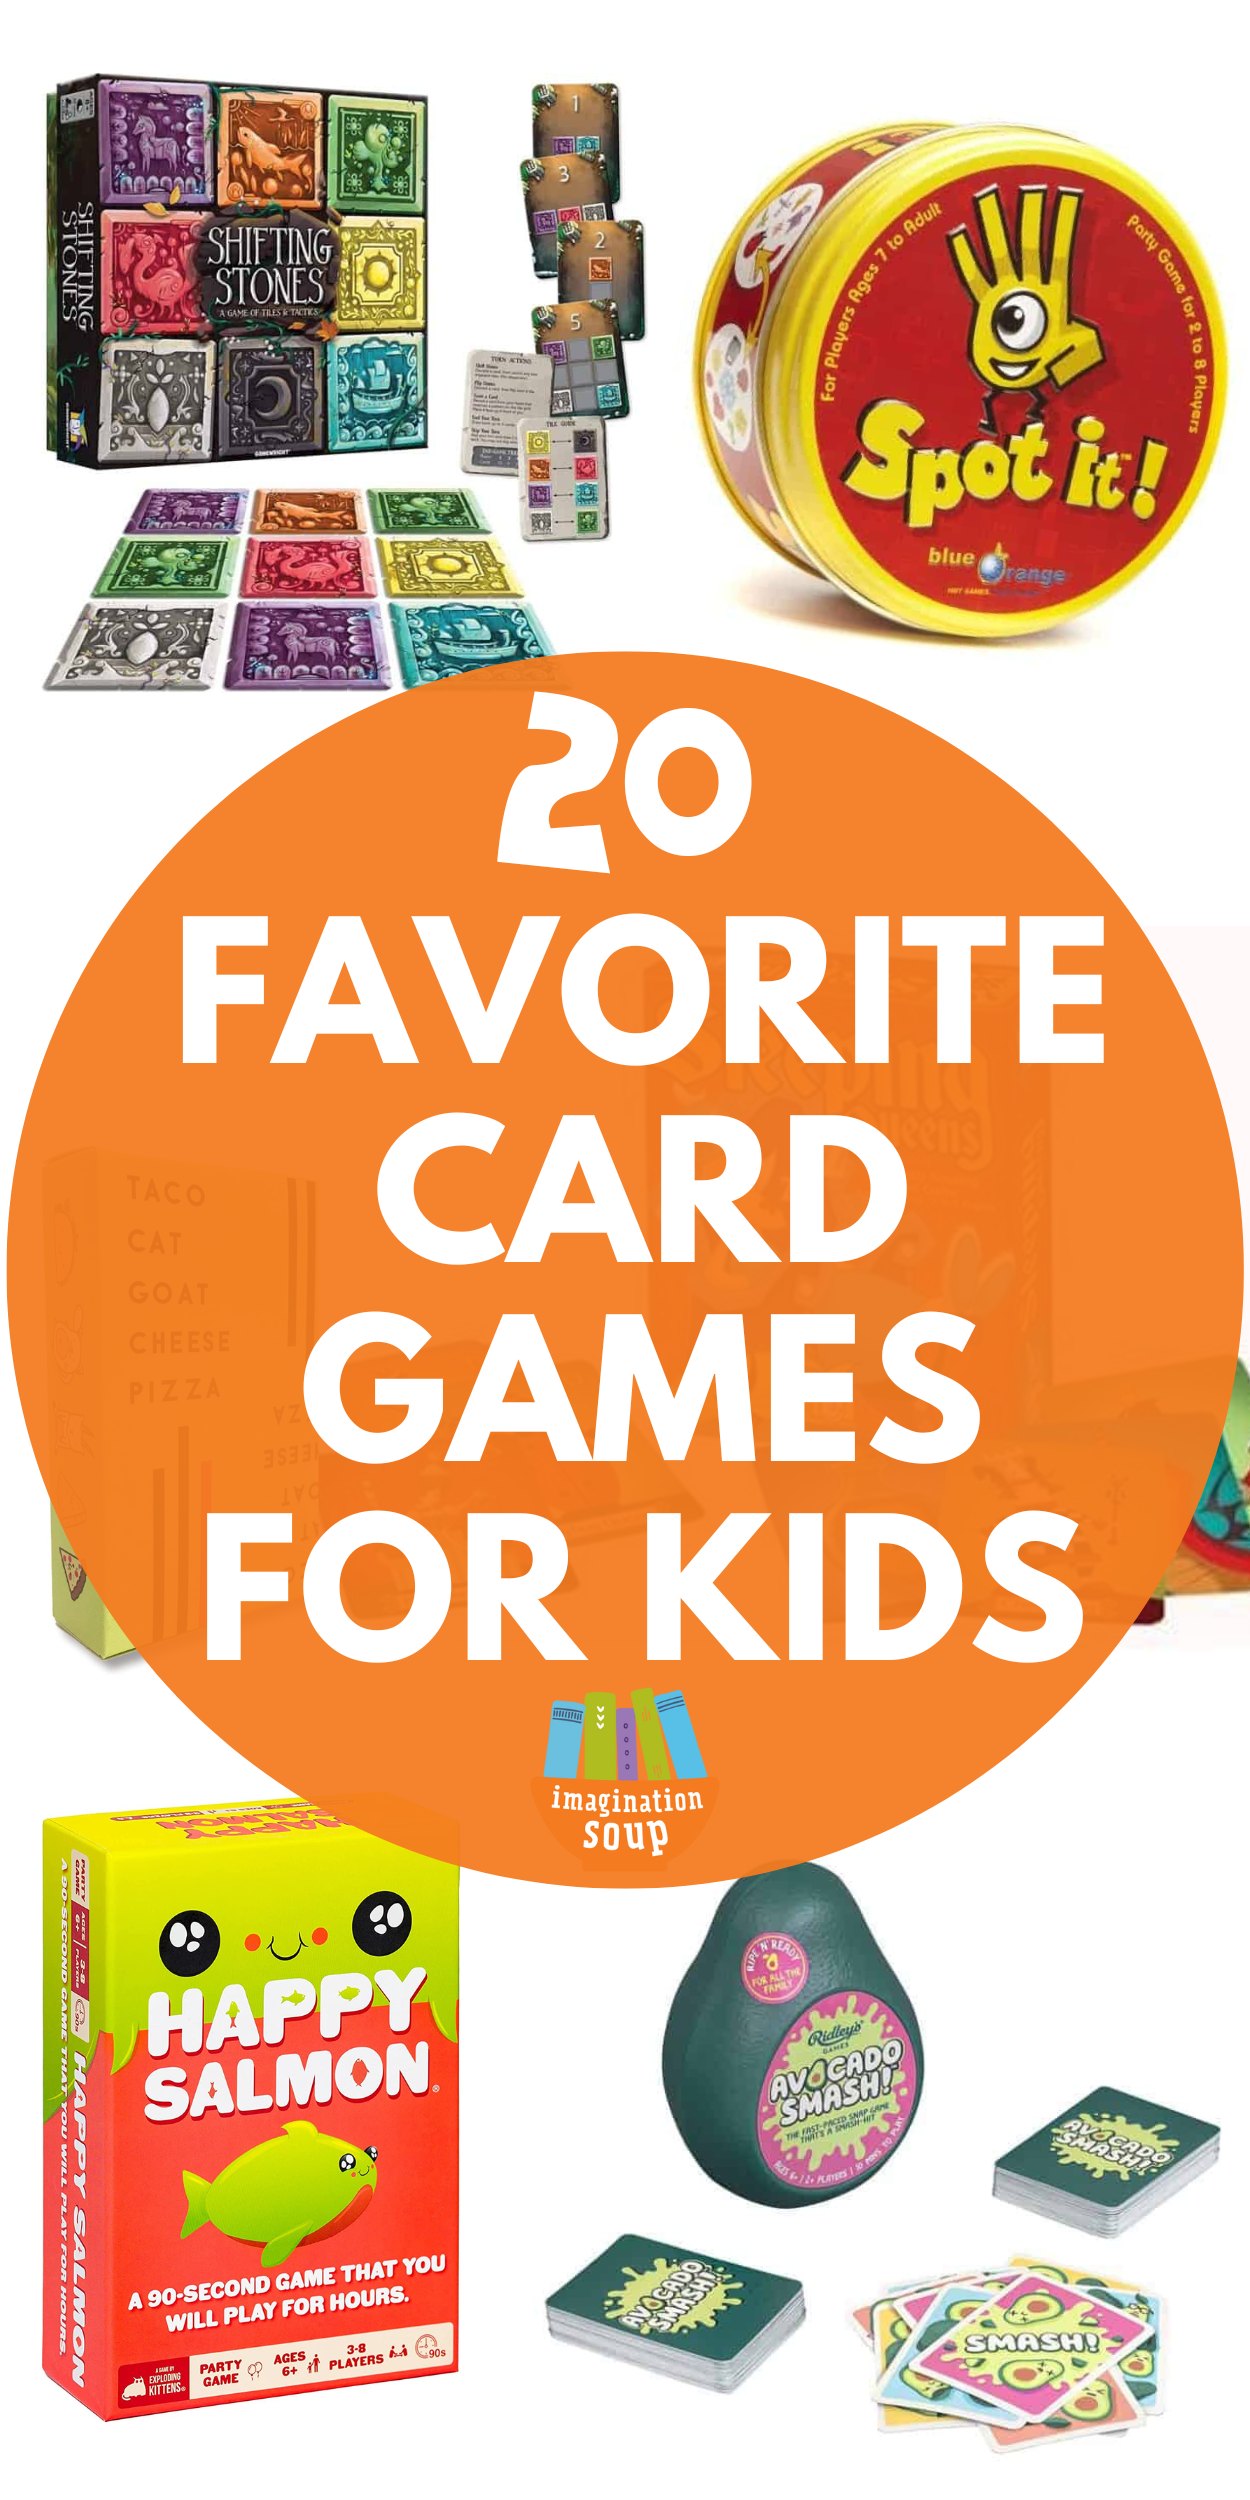 Want some new card games for kids that they'll LOVE? Even better, card games that your entire family will love...and that may even teach concepts and skills?

Since my family loves family game night (pretty much every night for us), we buy and test games regularly. I want to share our favorite card games for kids so you can find the best card games for your family, too. Specifically, games for many ages of children to play together!